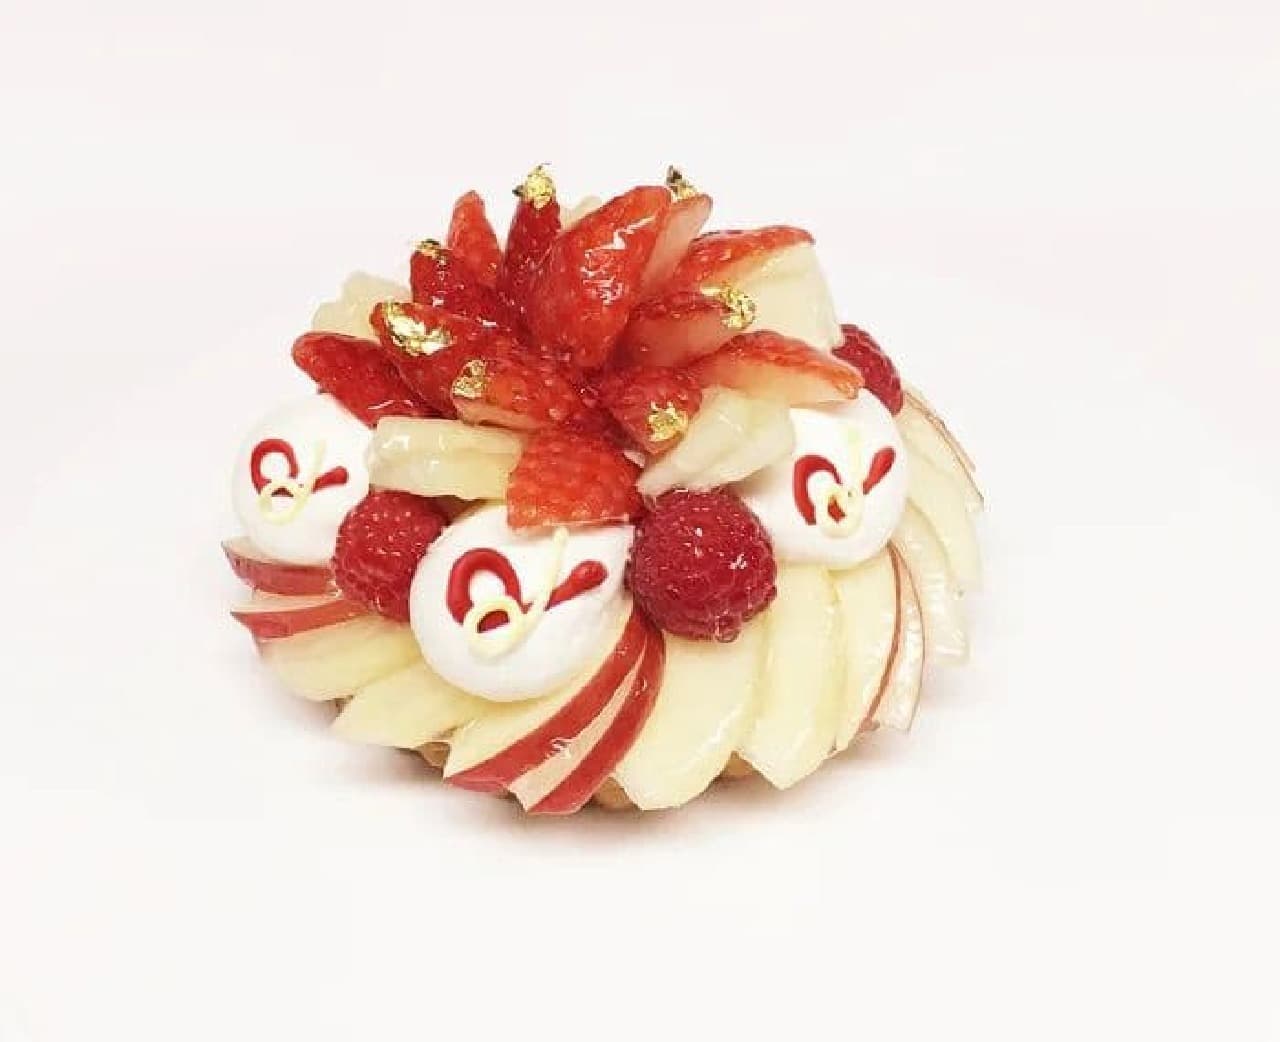 Cafe COMSA "Reservation Limited New Year's Cake -Pear and Strawberry Cake-".